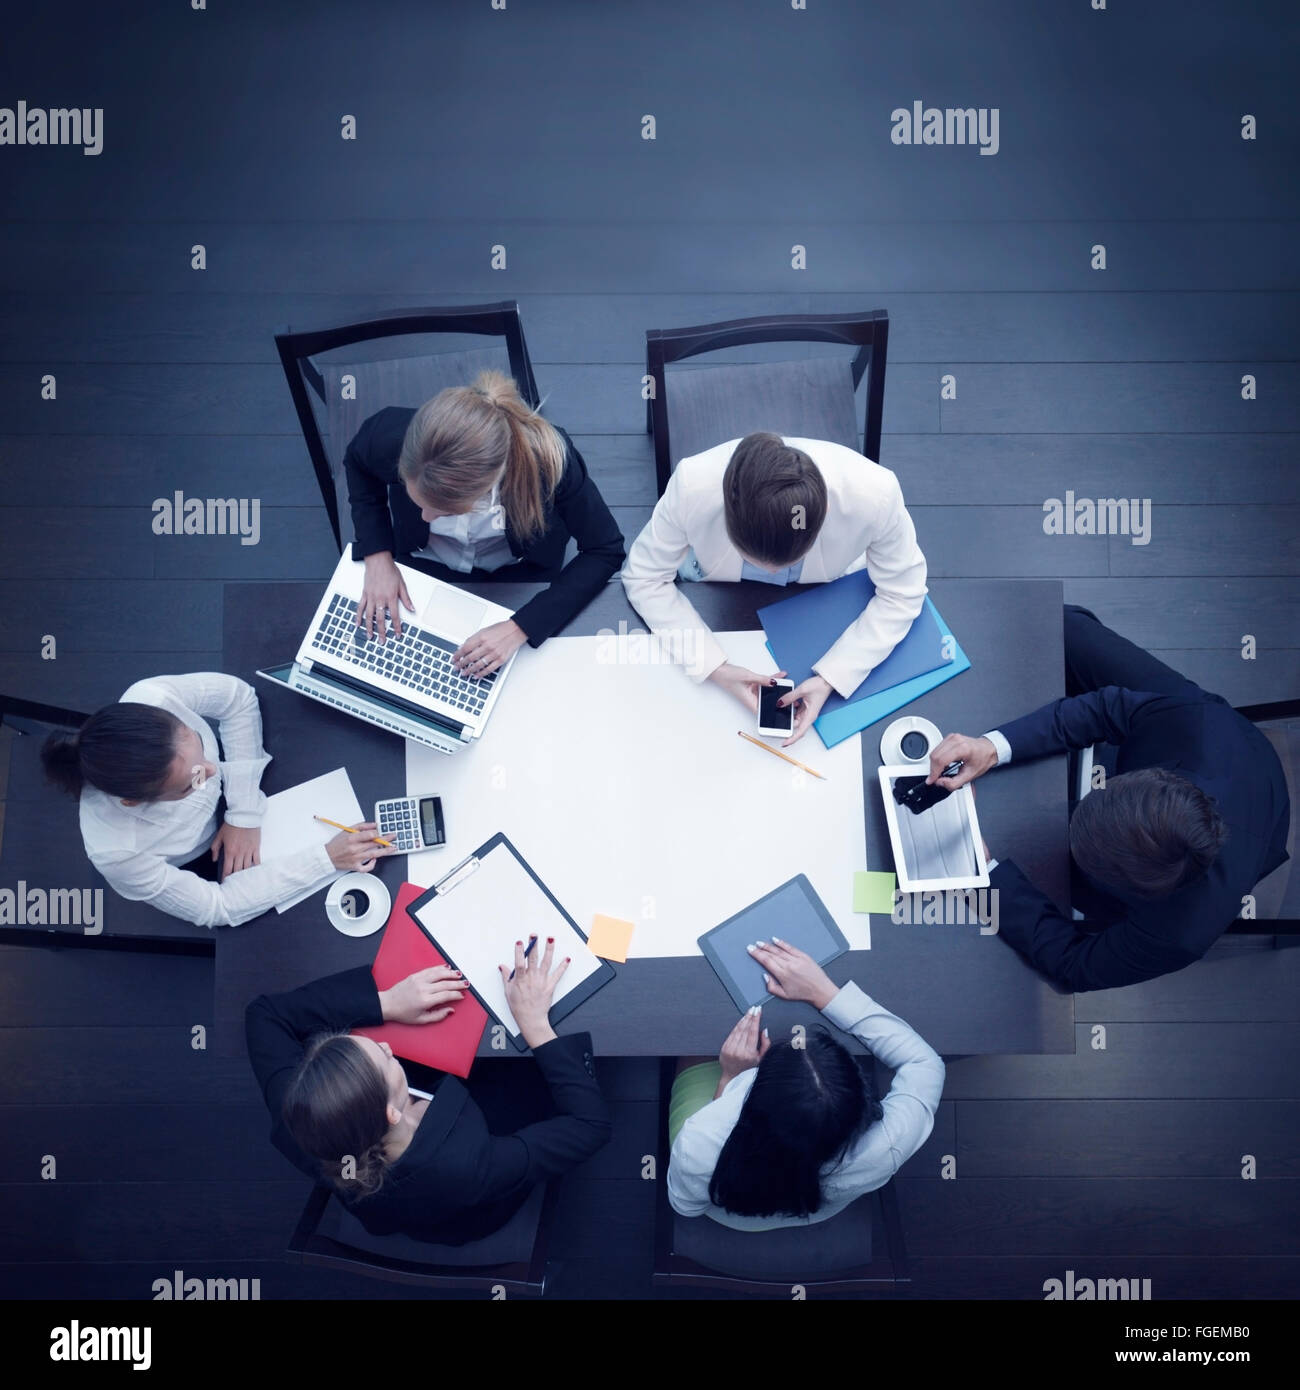 Business workplace with people, cup of coffee, digital tablet, smartphone, papers and various office objects on table Stock Photo